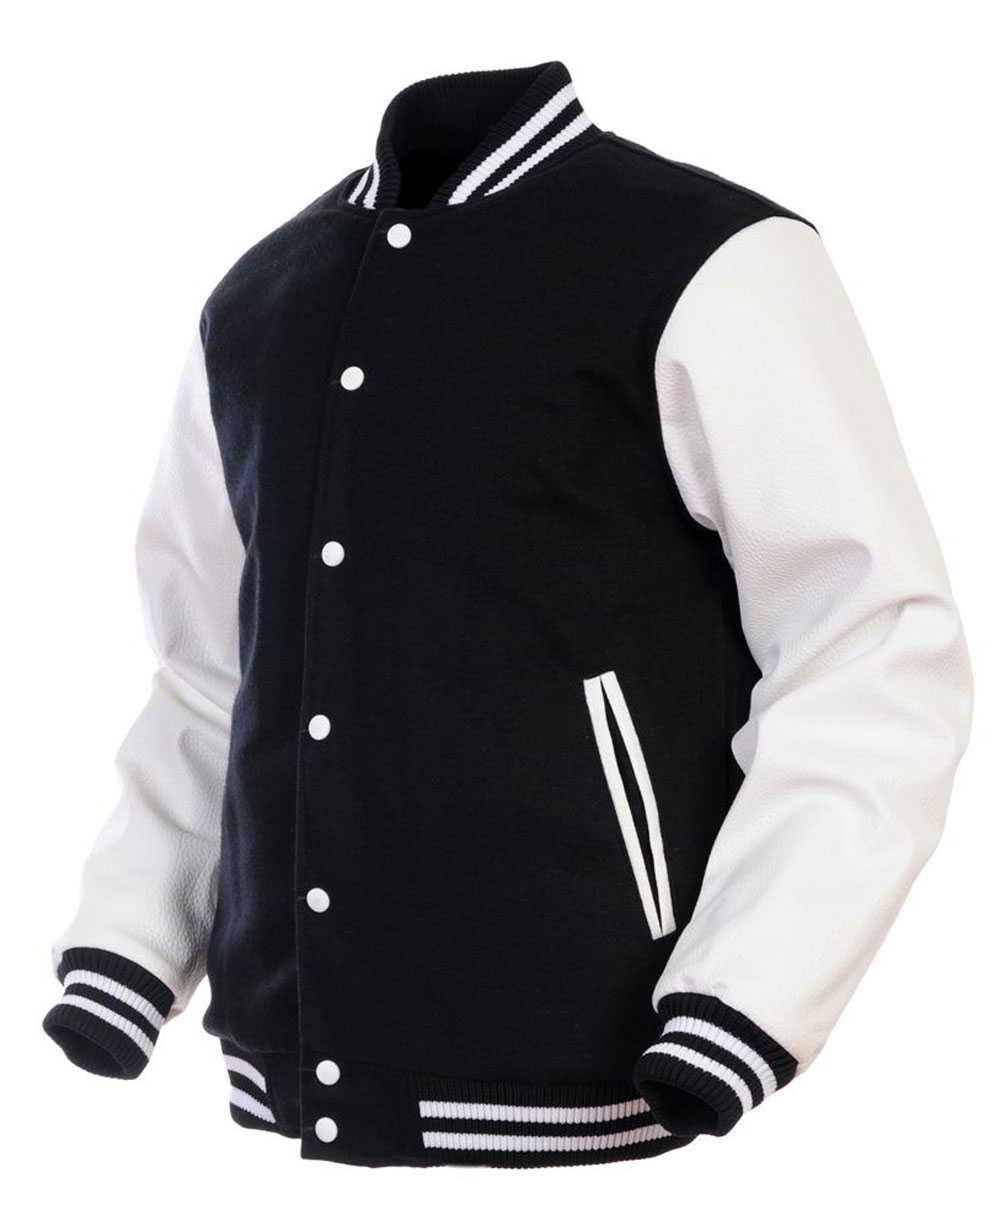 Black & White Wool & Leather College Letterman Jacket